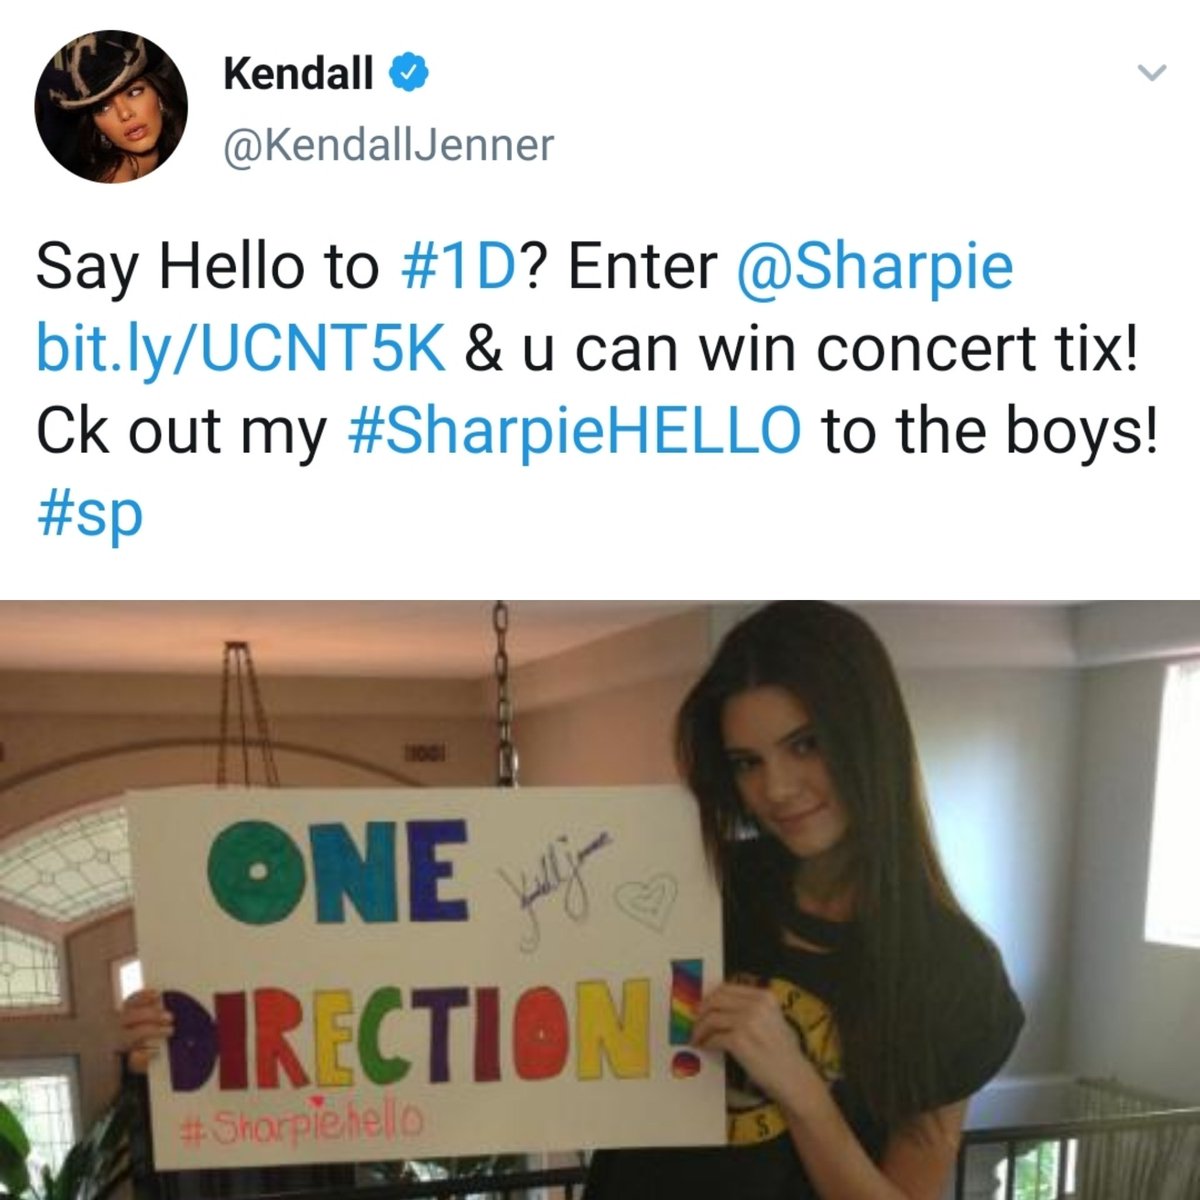 20 November 12: Kendall enters Sharpie's contest to win One Direction tickets.